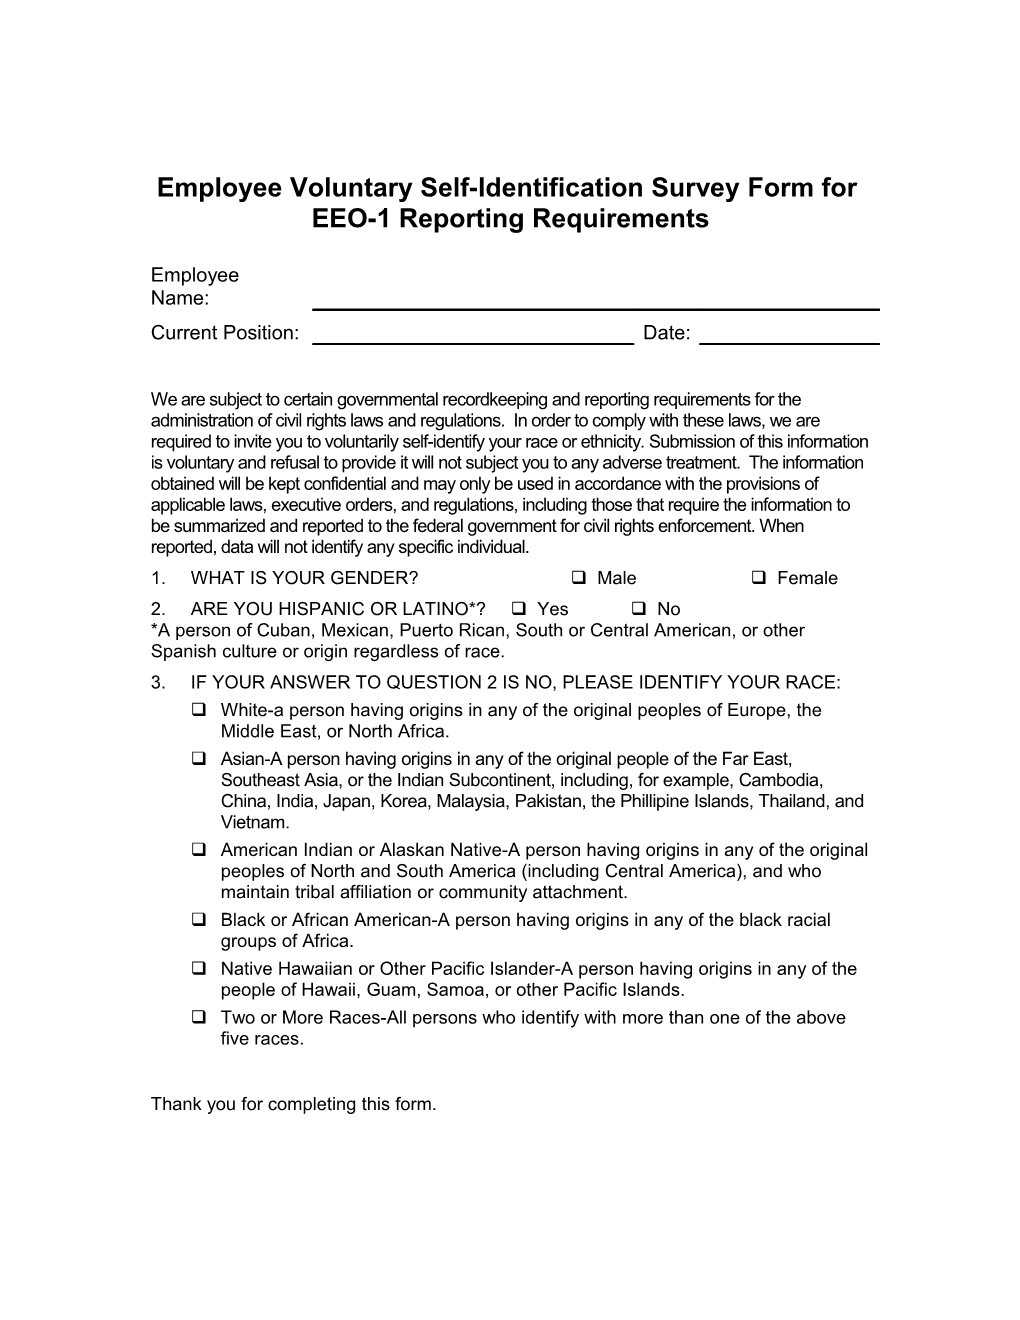 Employee Voluntary Self-Identification Survey Form for EEO-1 Reporting Requirements